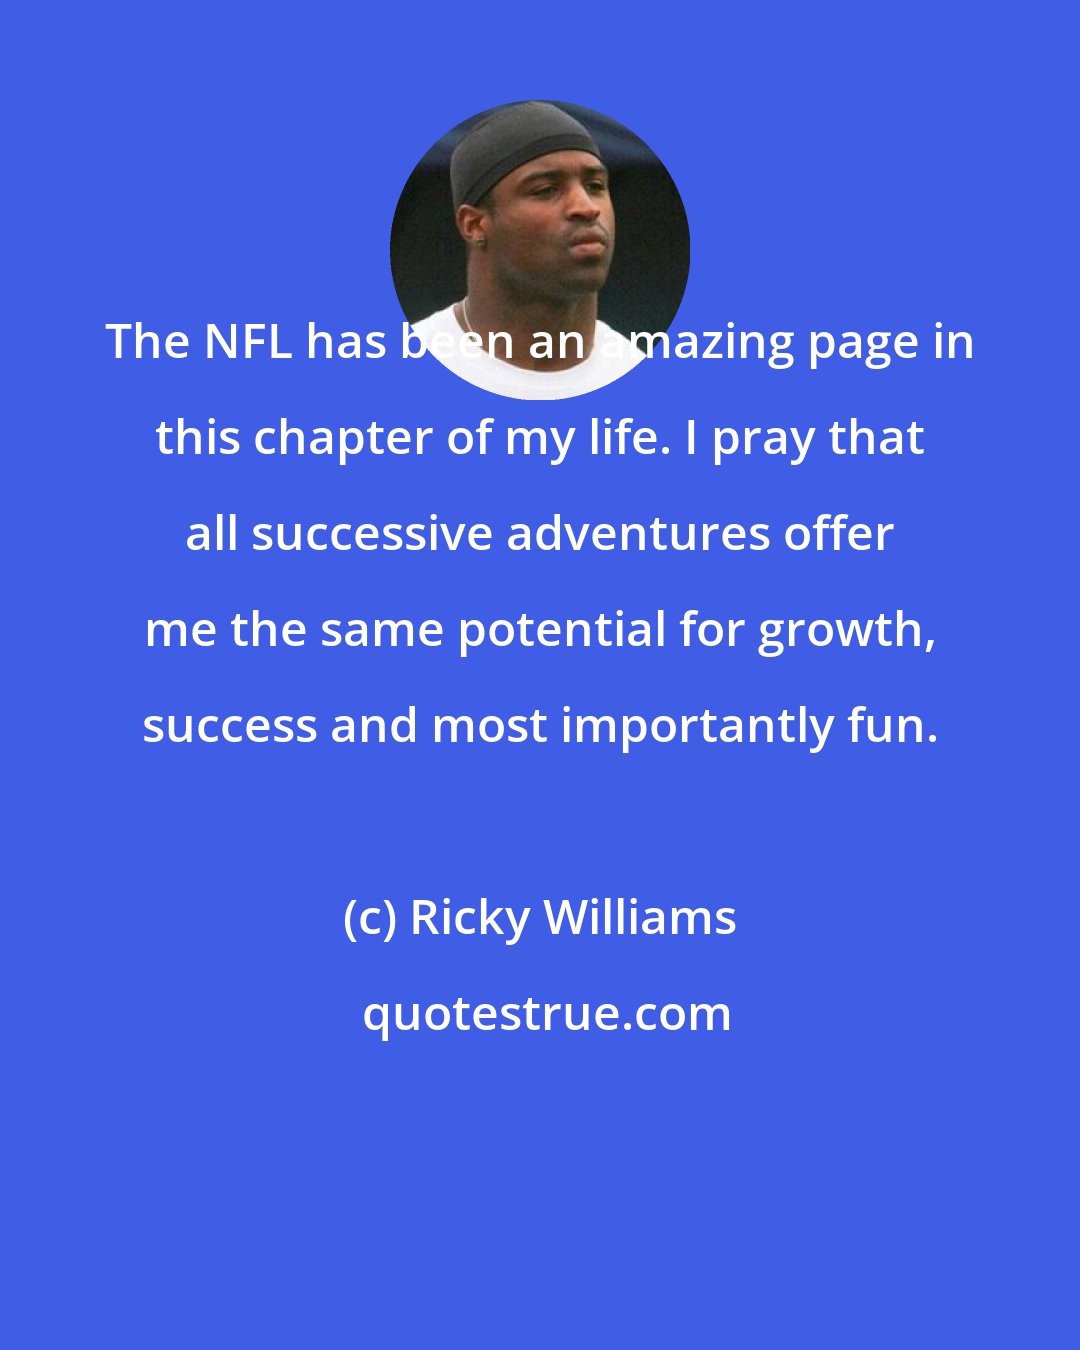 Ricky Williams: The NFL has been an amazing page in this chapter of my life. I pray that all successive adventures offer me the same potential for growth, success and most importantly fun.